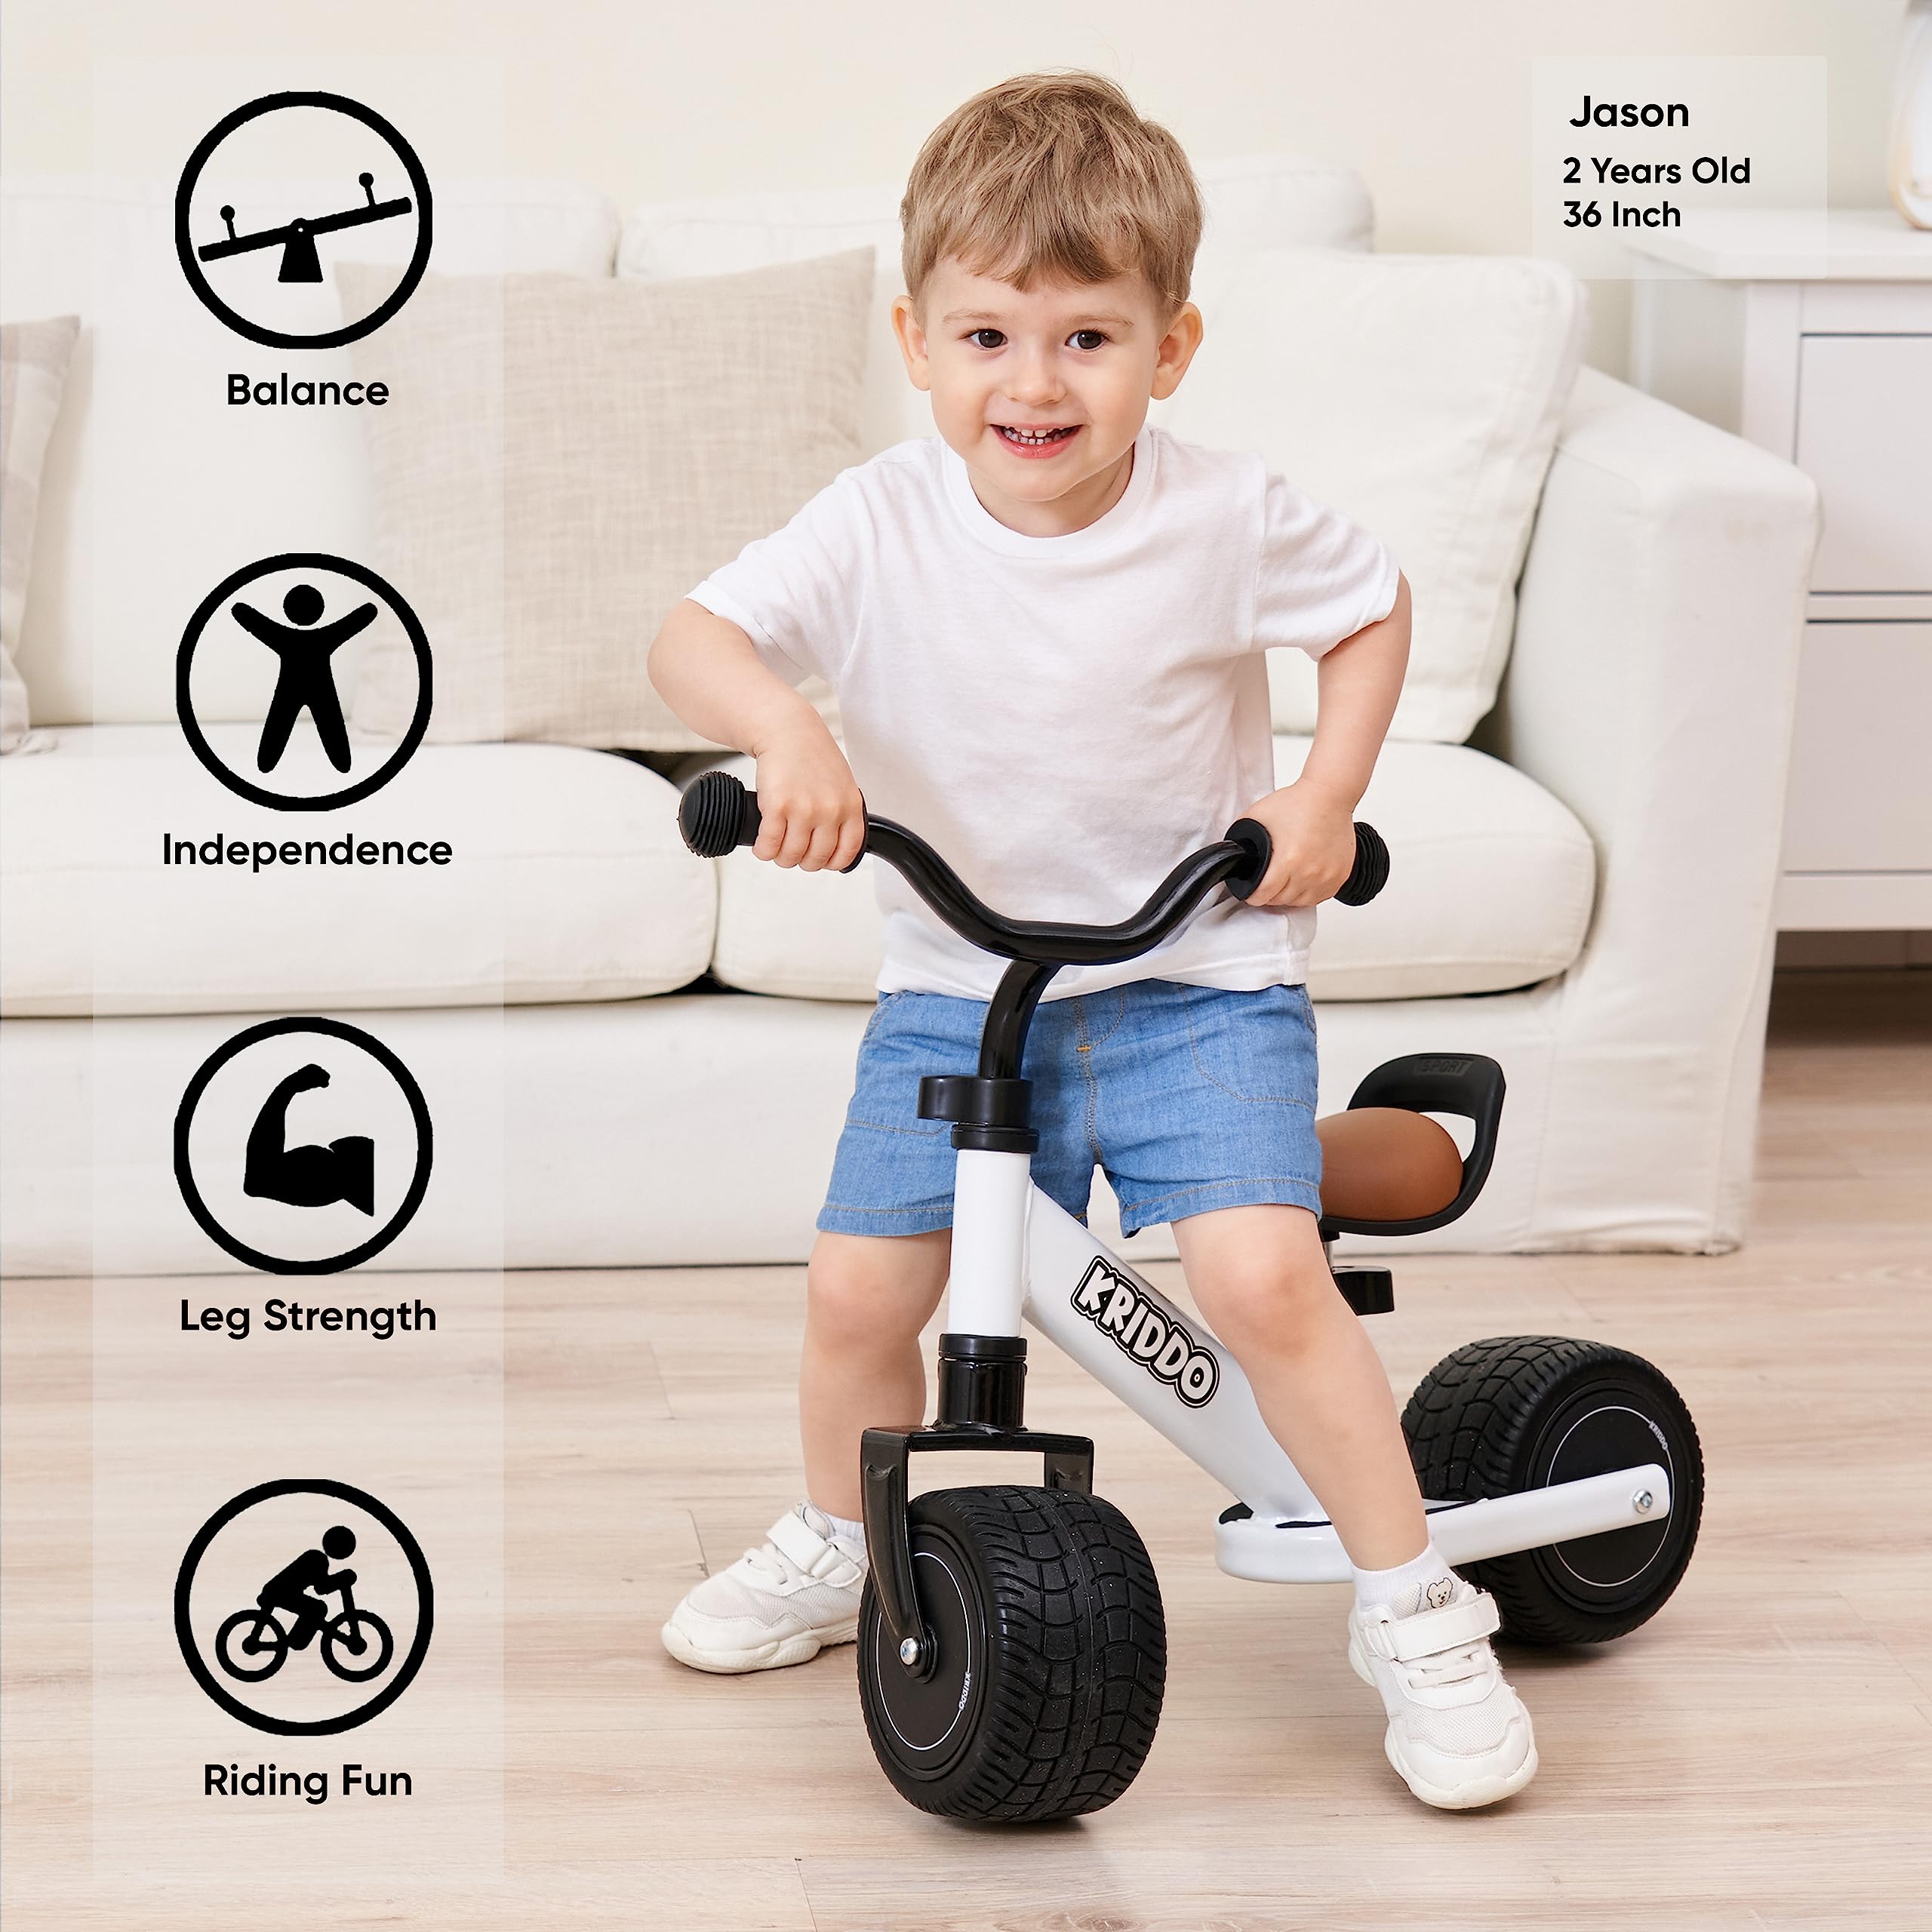 KRIDDO Baby Balance Bike 1-3 Year Old, Mini Cruiser Bike for One Year Old First Birthday Gifts Baby Toys 12 Months to 3 Year Old, Black